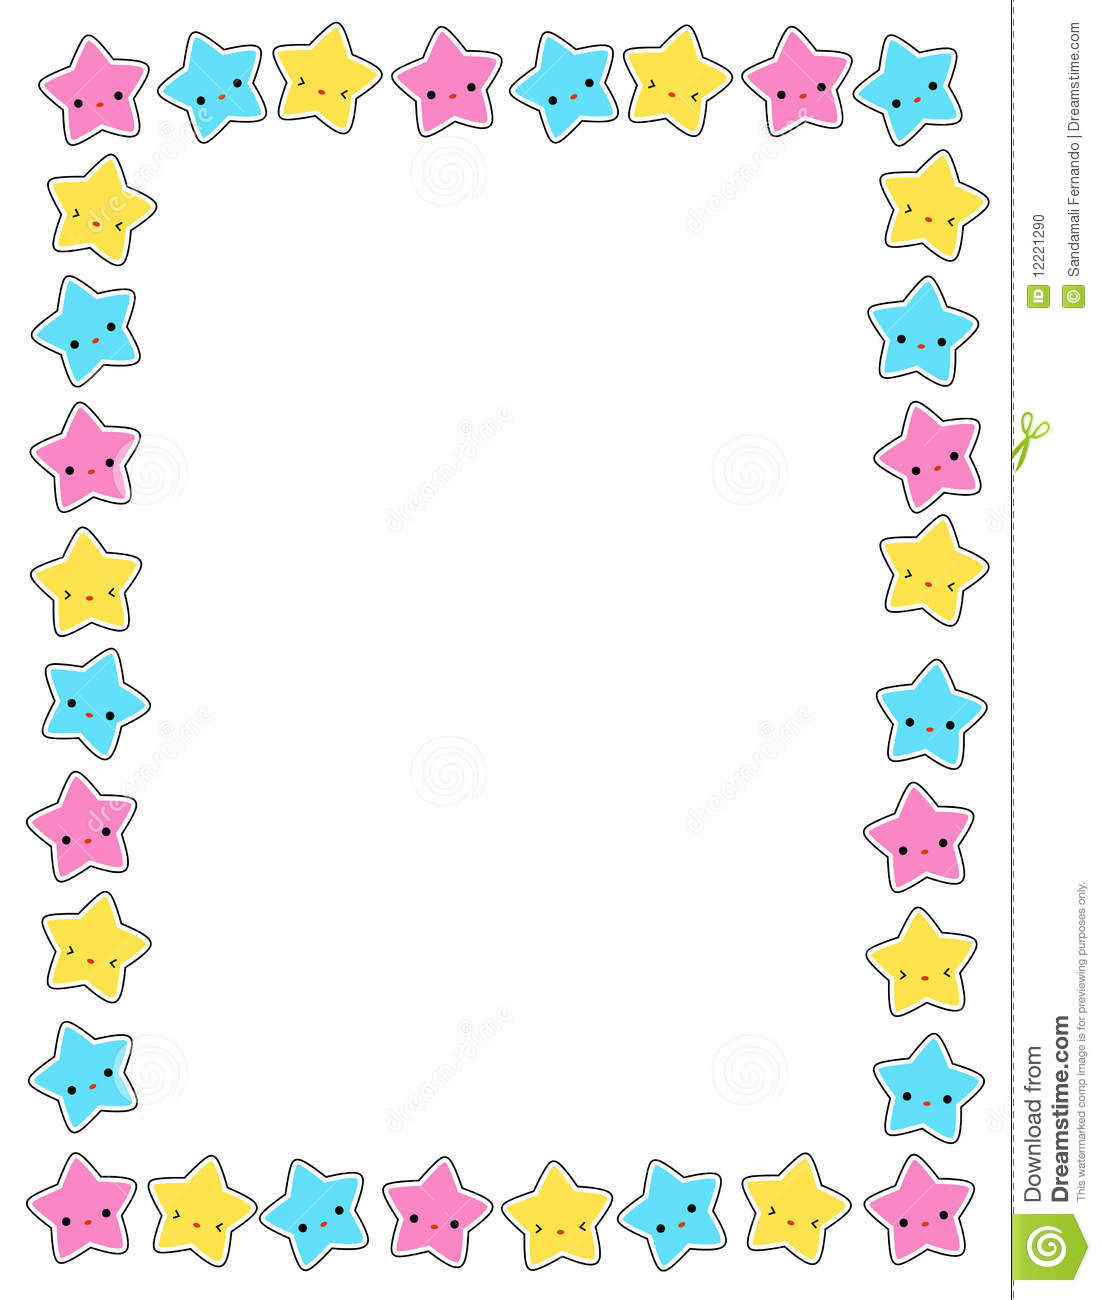 Cute Colorful Stars Border   Frame For Greeting Cards Party